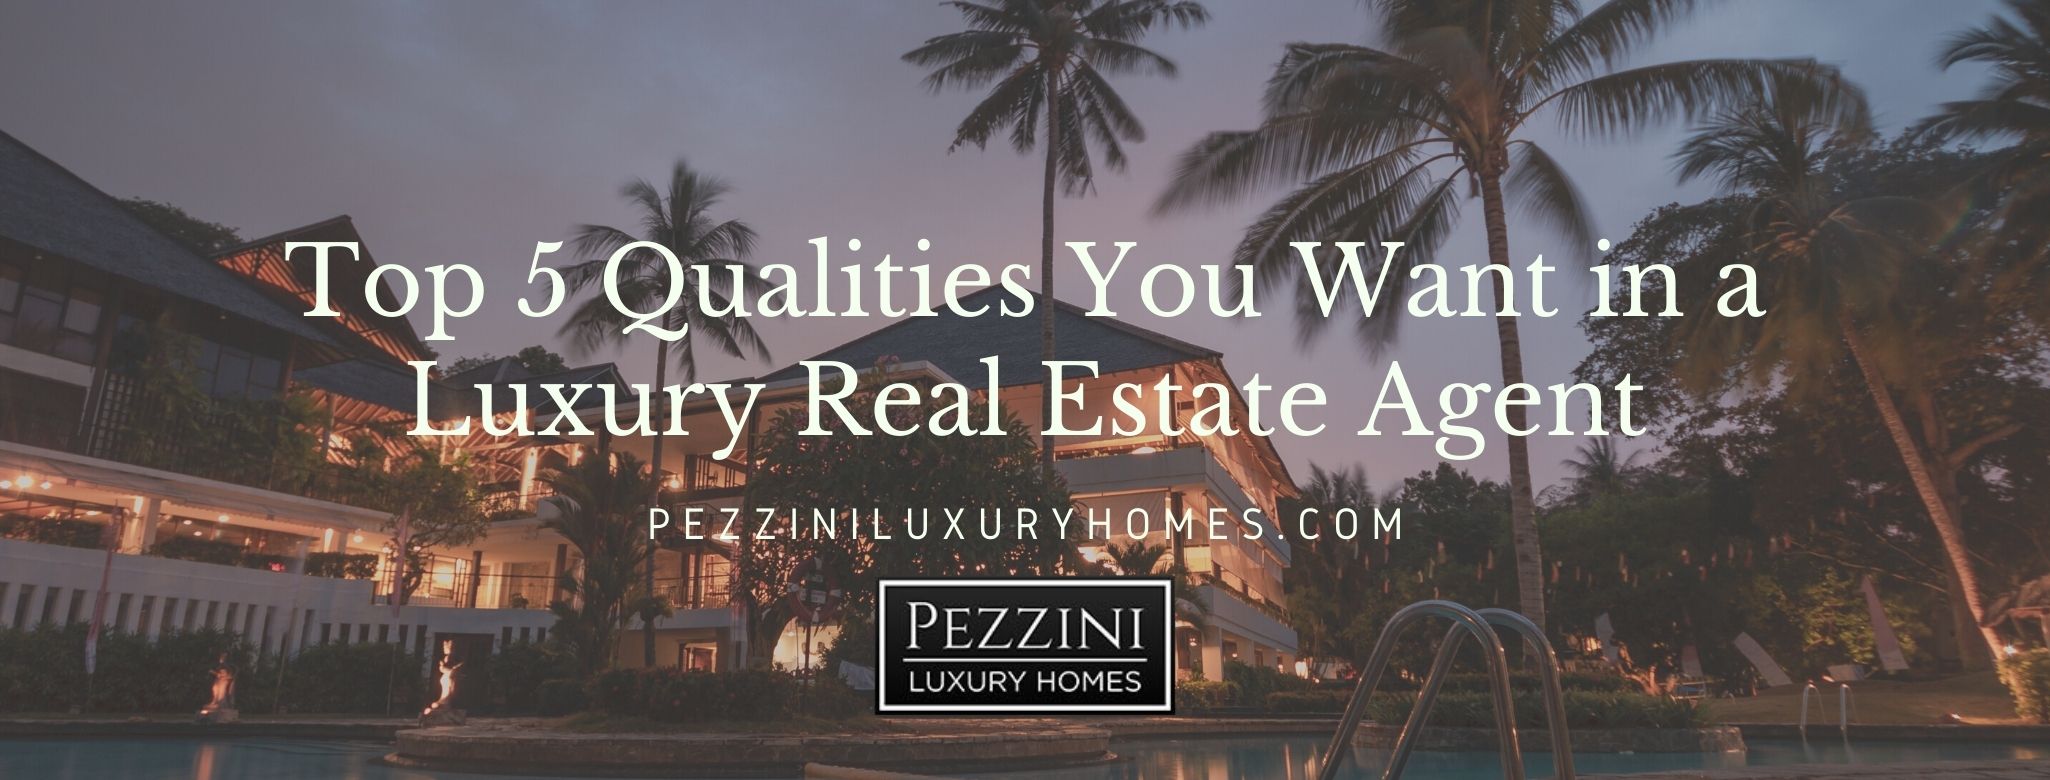 Top 5 Qualities You Want in a Luxury Real Estate Agent